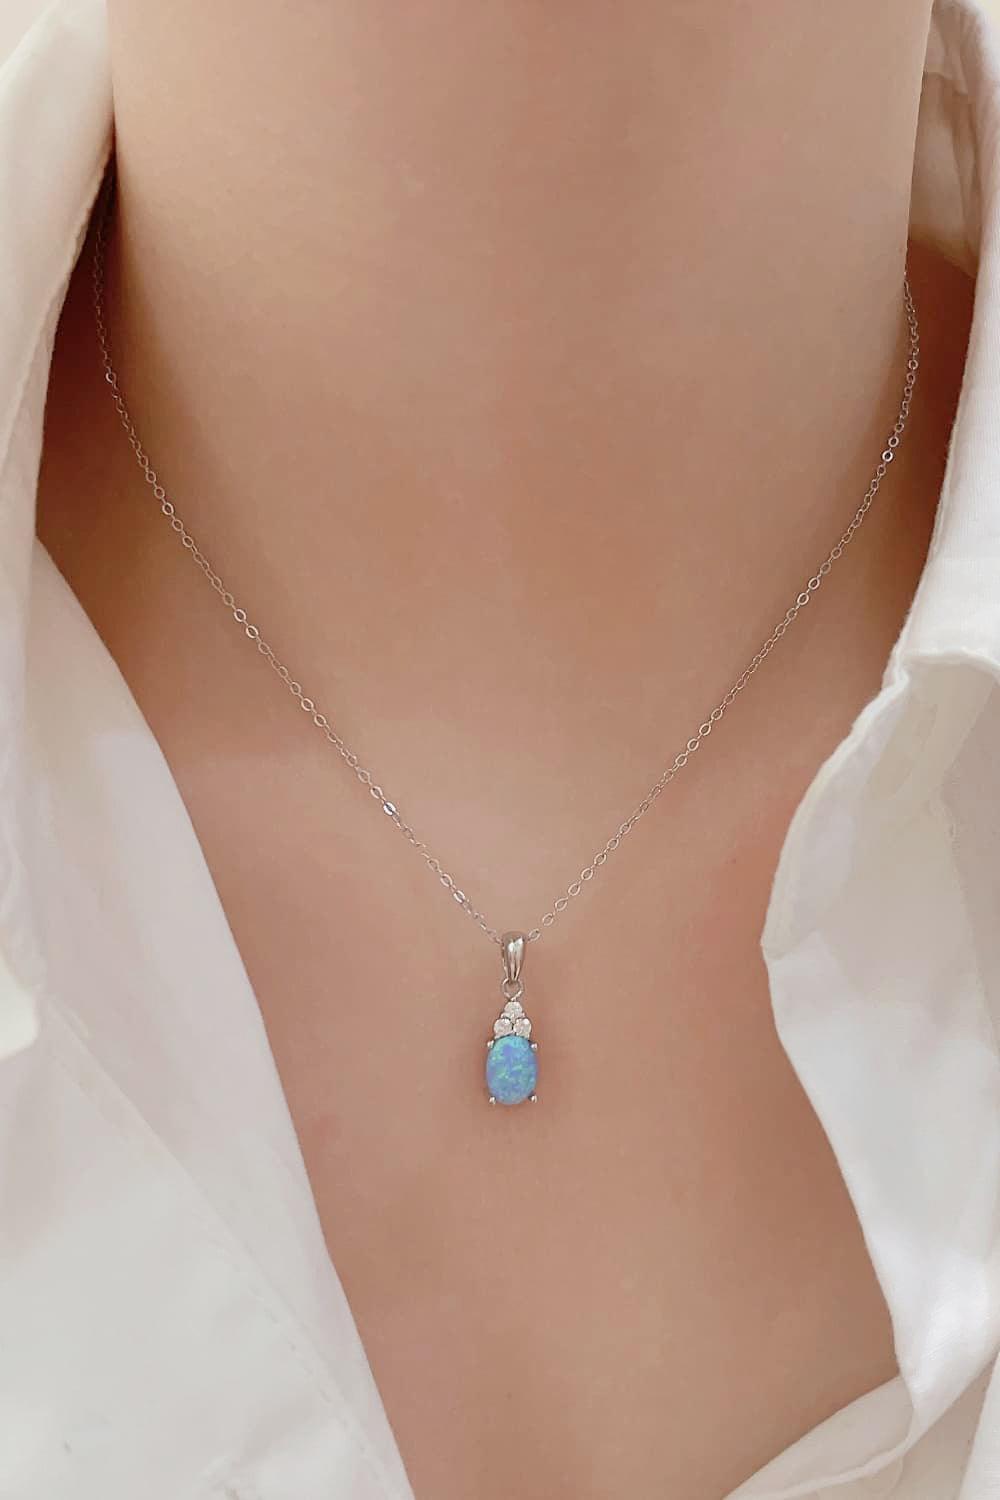 Find Your Center Opal Pendant Necklace - Stuffed Cart